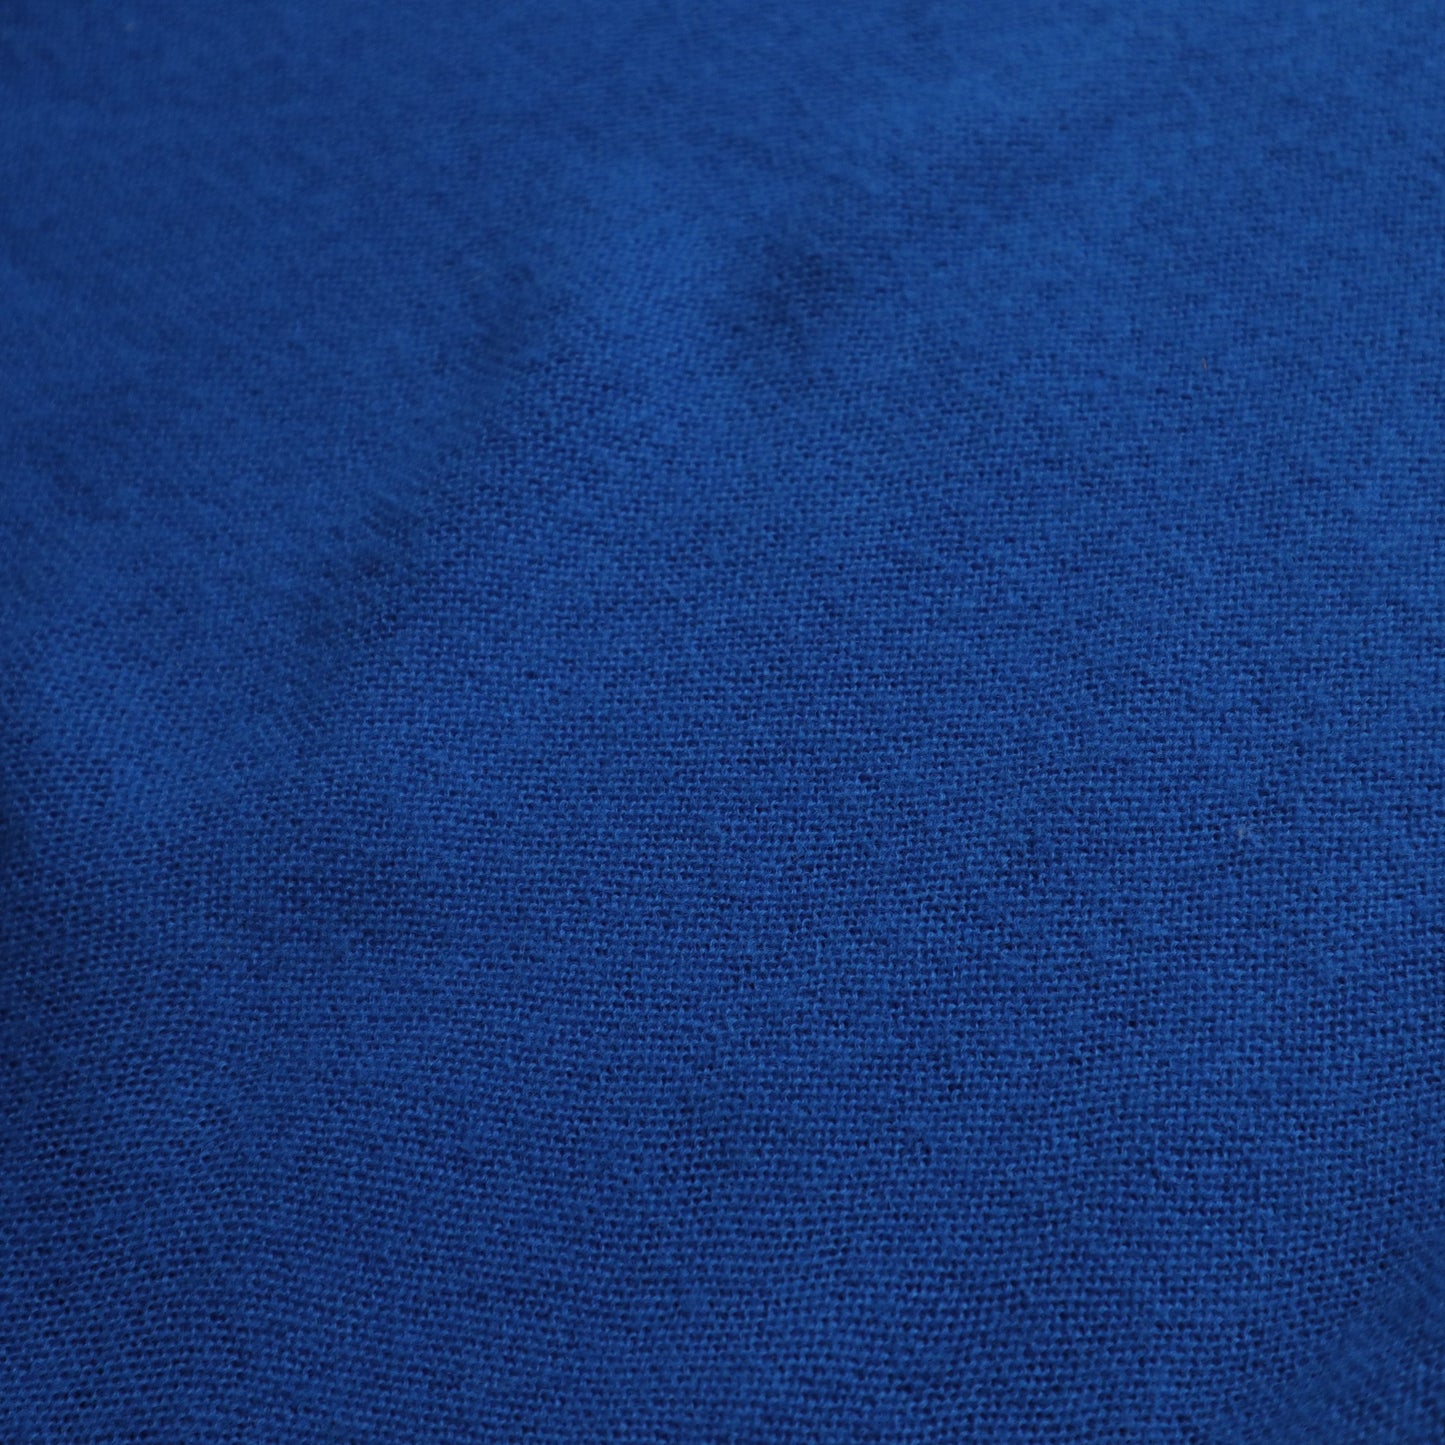 1980s Lacoste IZOD royal blue V-neck sweater made in the United States